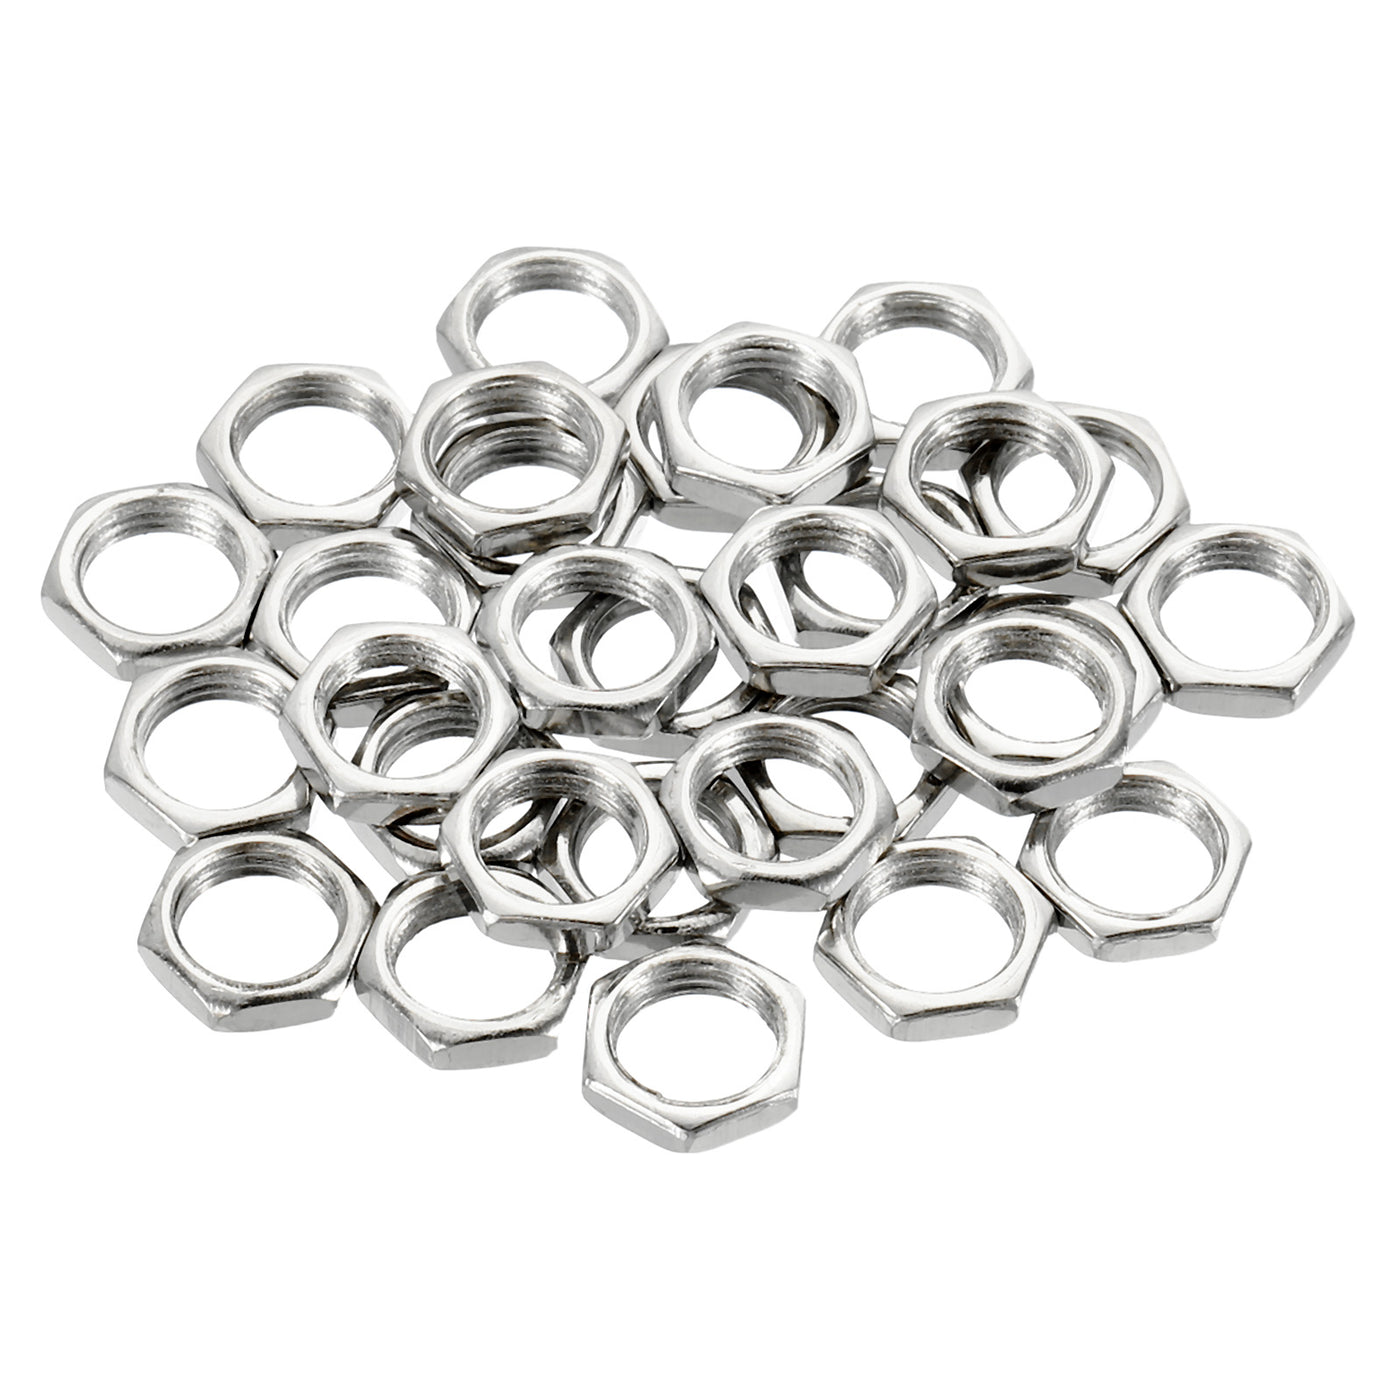 Harfington M8 x 0.75 Steel Hex Nuts, 30 Pack Metric Thread Zinc Plated Finished Hardware Nuts Screw Bolt Fasteners 2mm Height